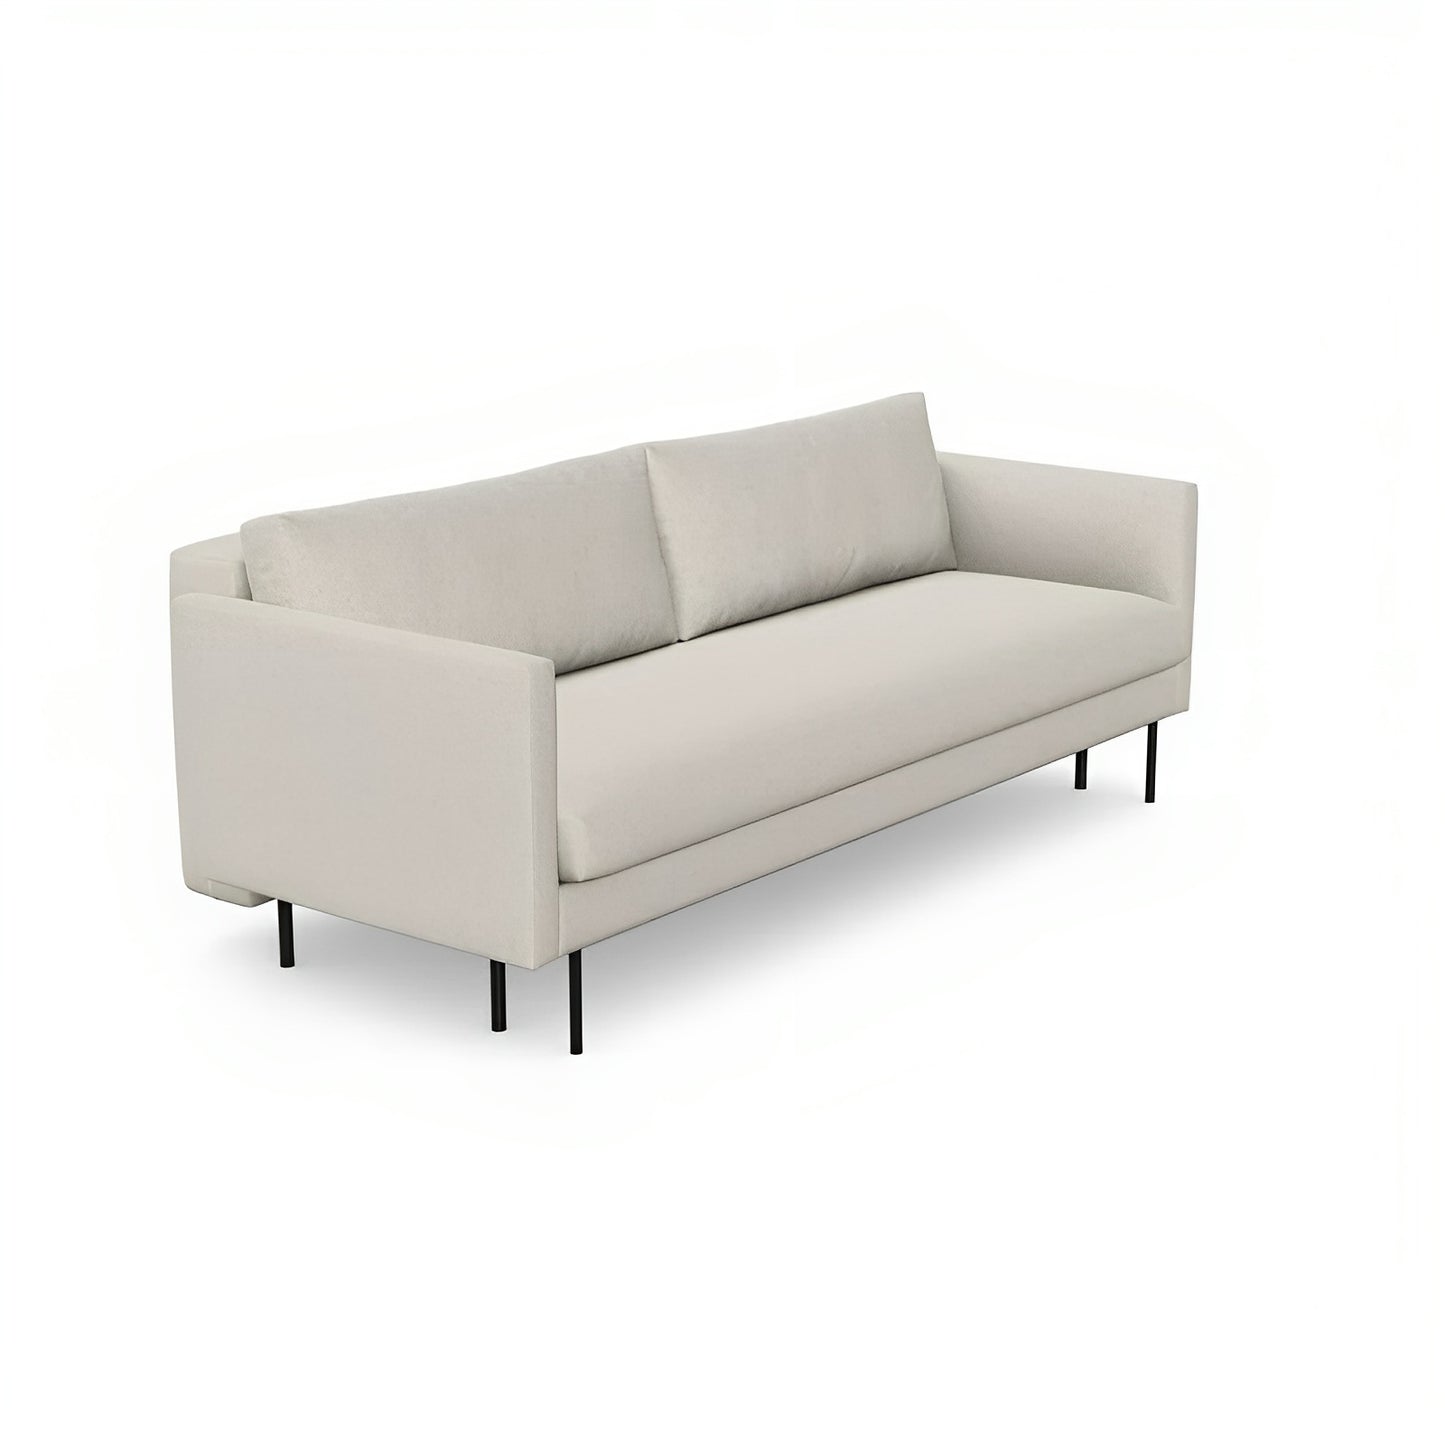 4 Seater Made to Order Sofa Bed